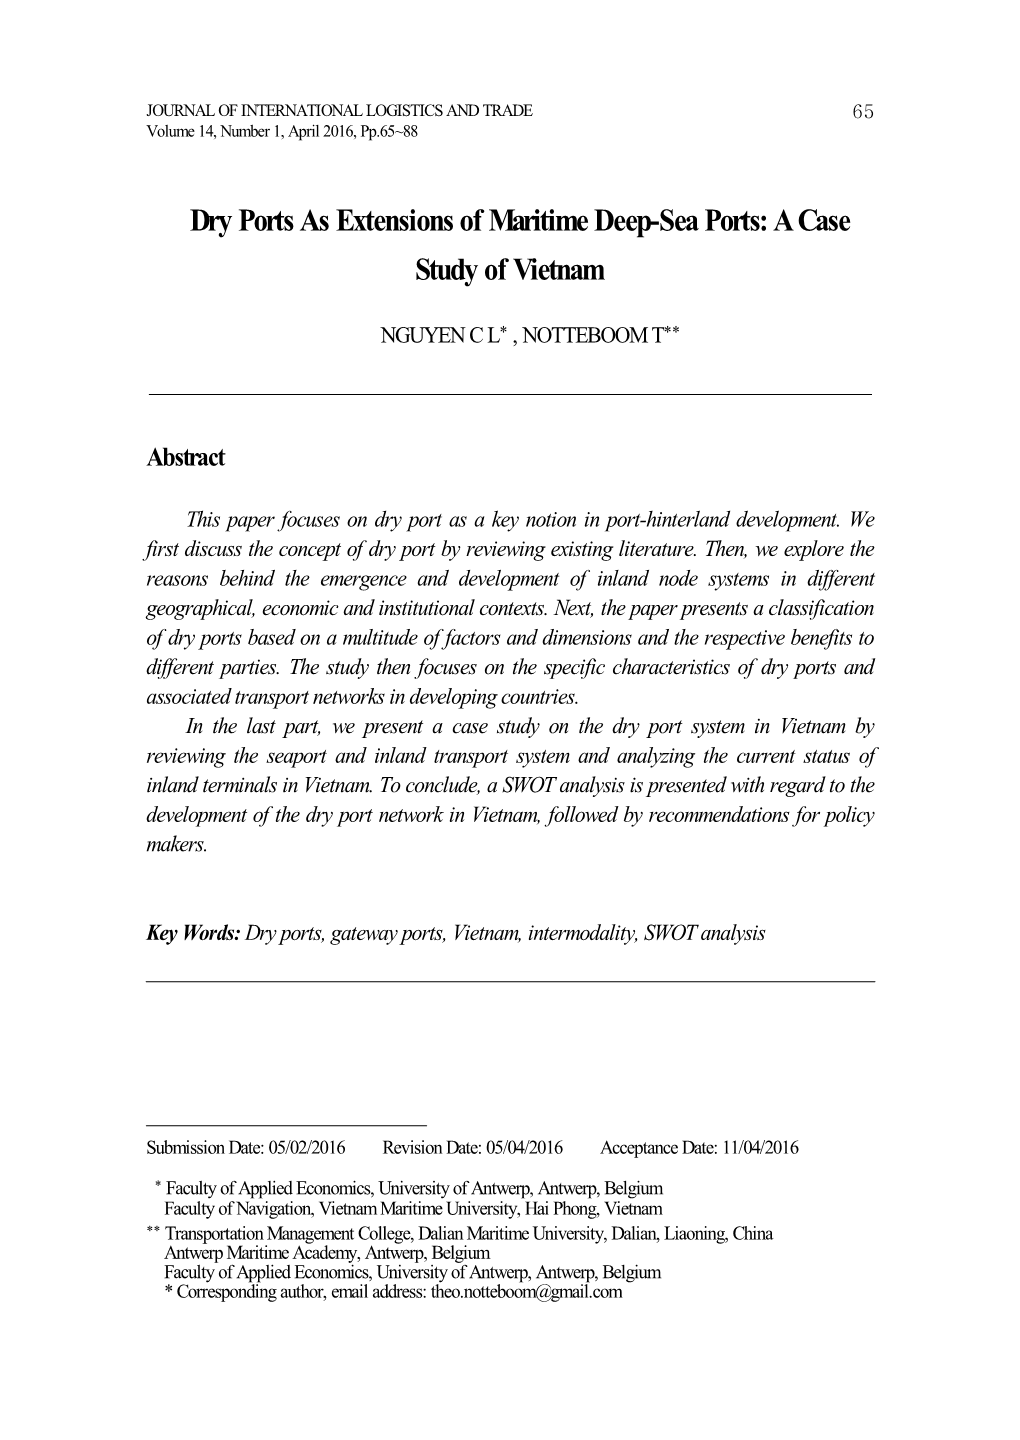 Dry Ports As Extensions of Maritime Deep-Sea Ports: a Case Study of Vietnam